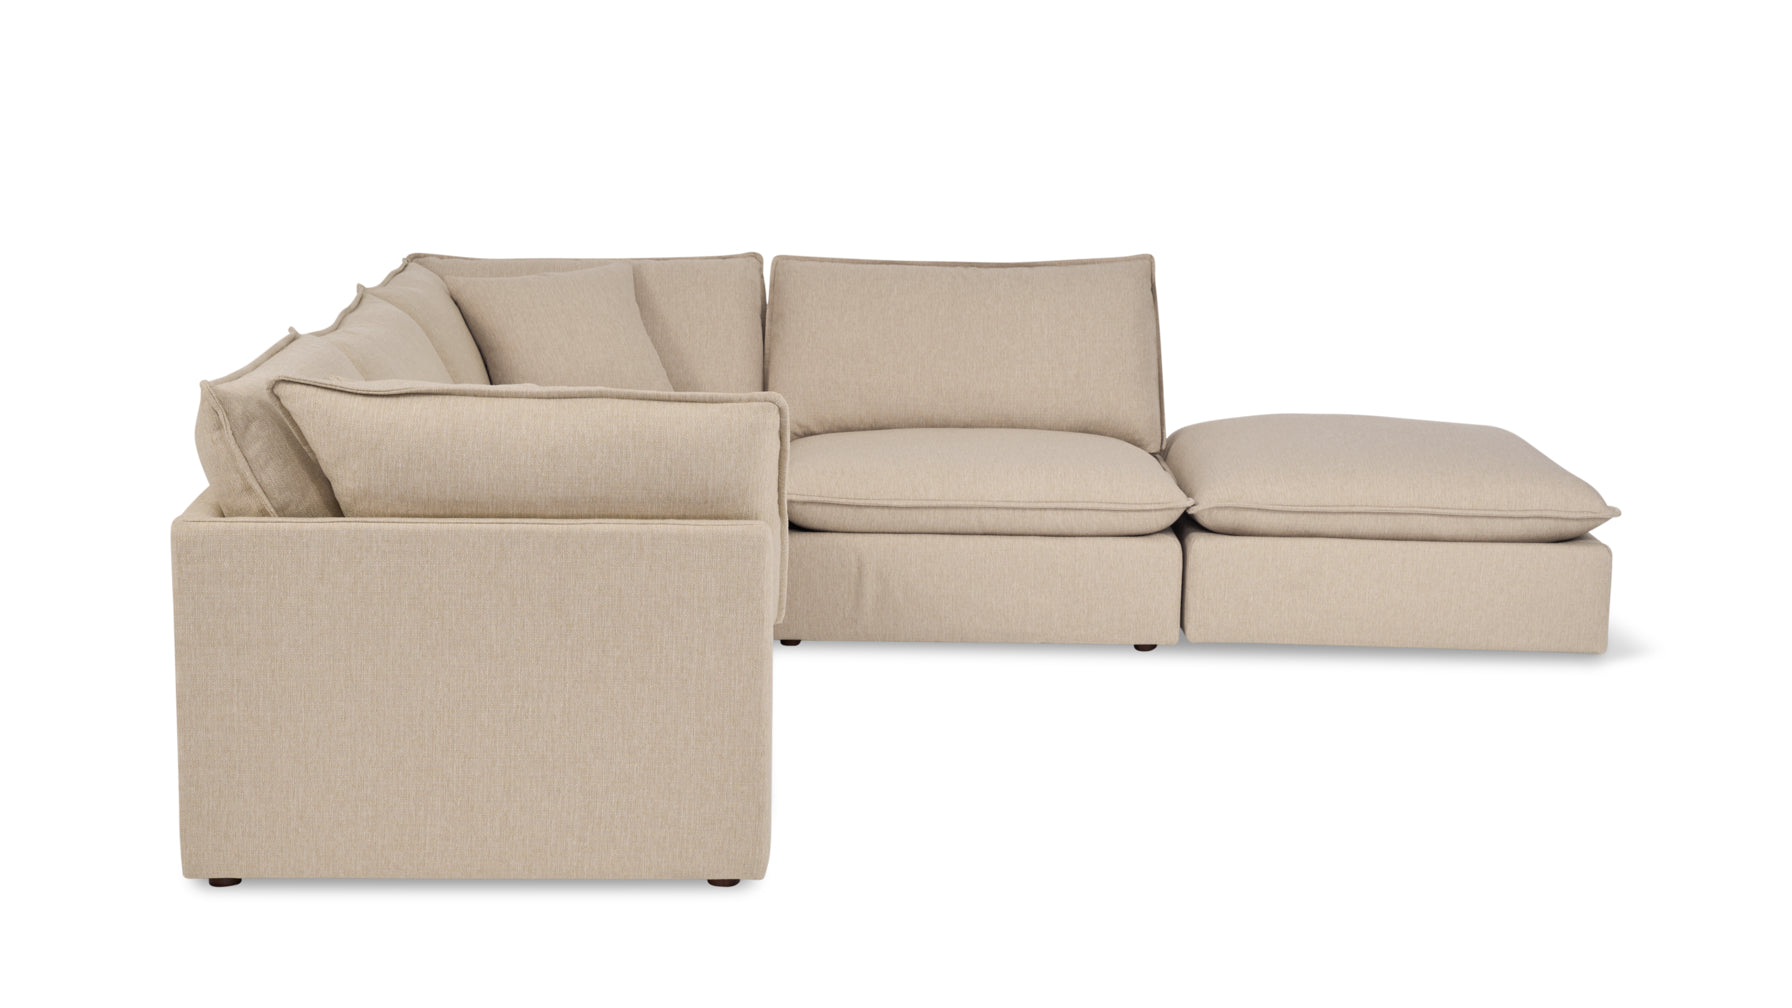 Chill Time 5-Piece Modular Sectional, Biscuit - Image 3